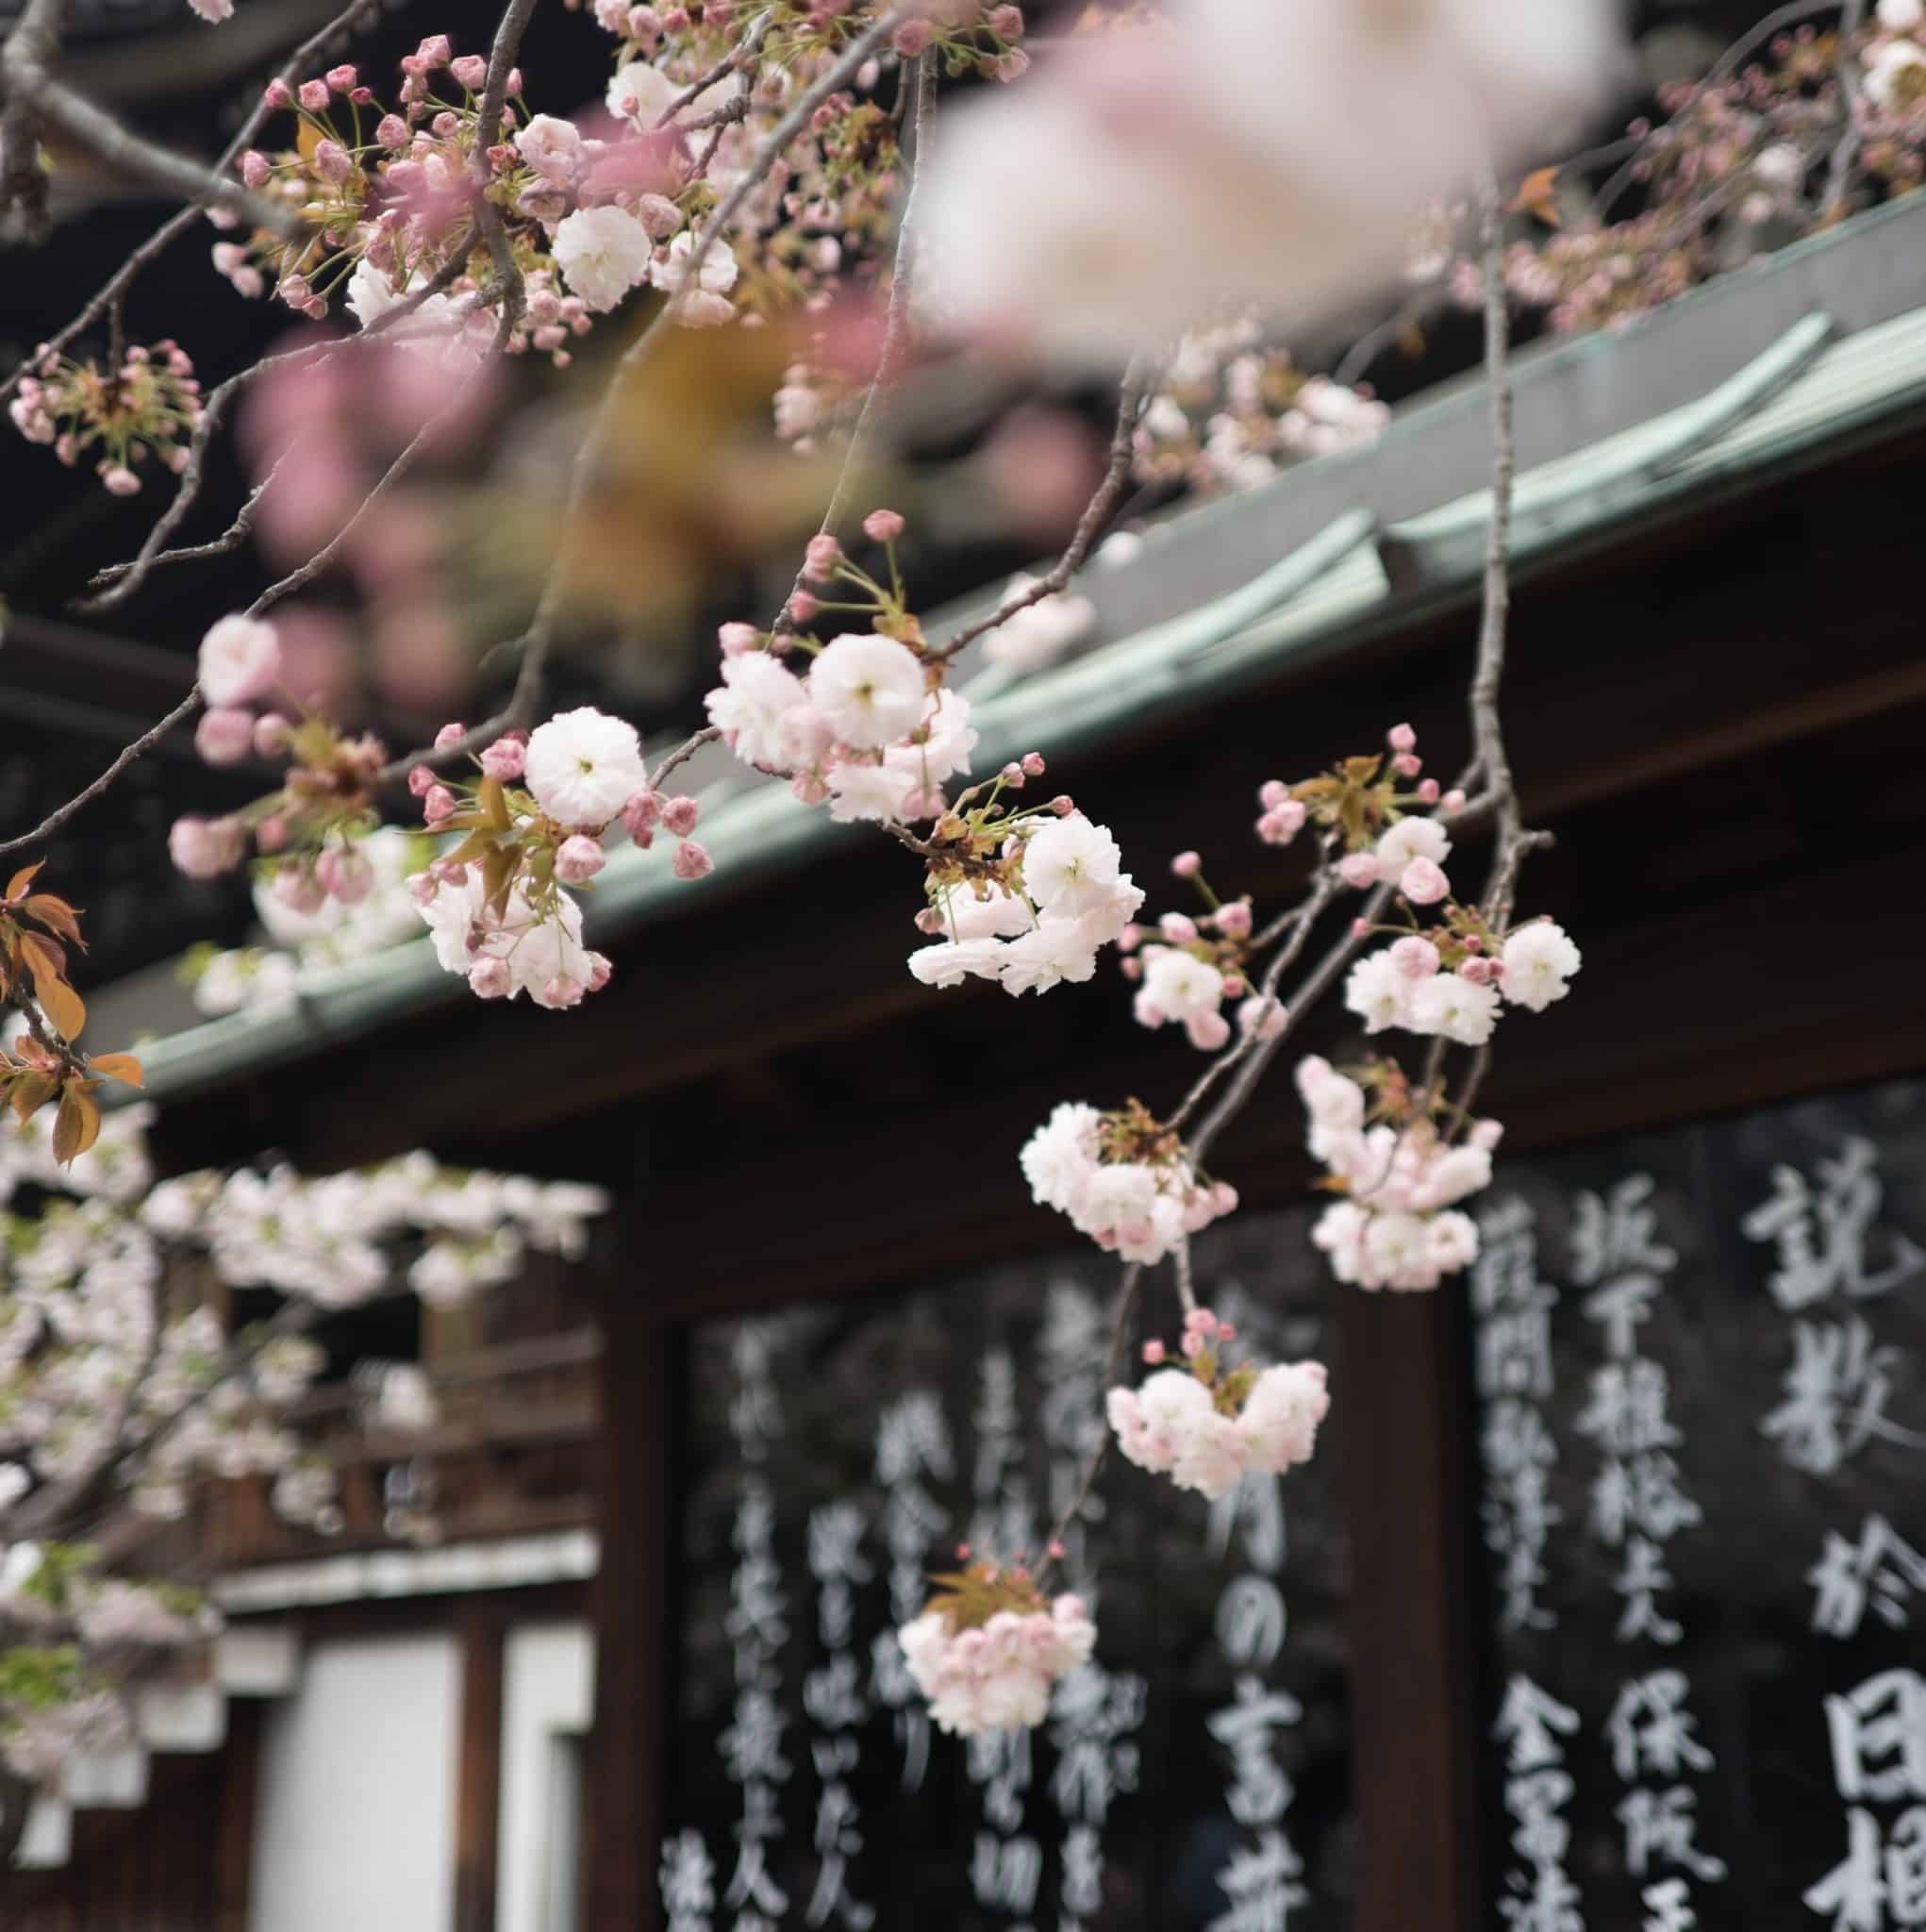 Is there a connection between Ikigai and the Japanese blossom?